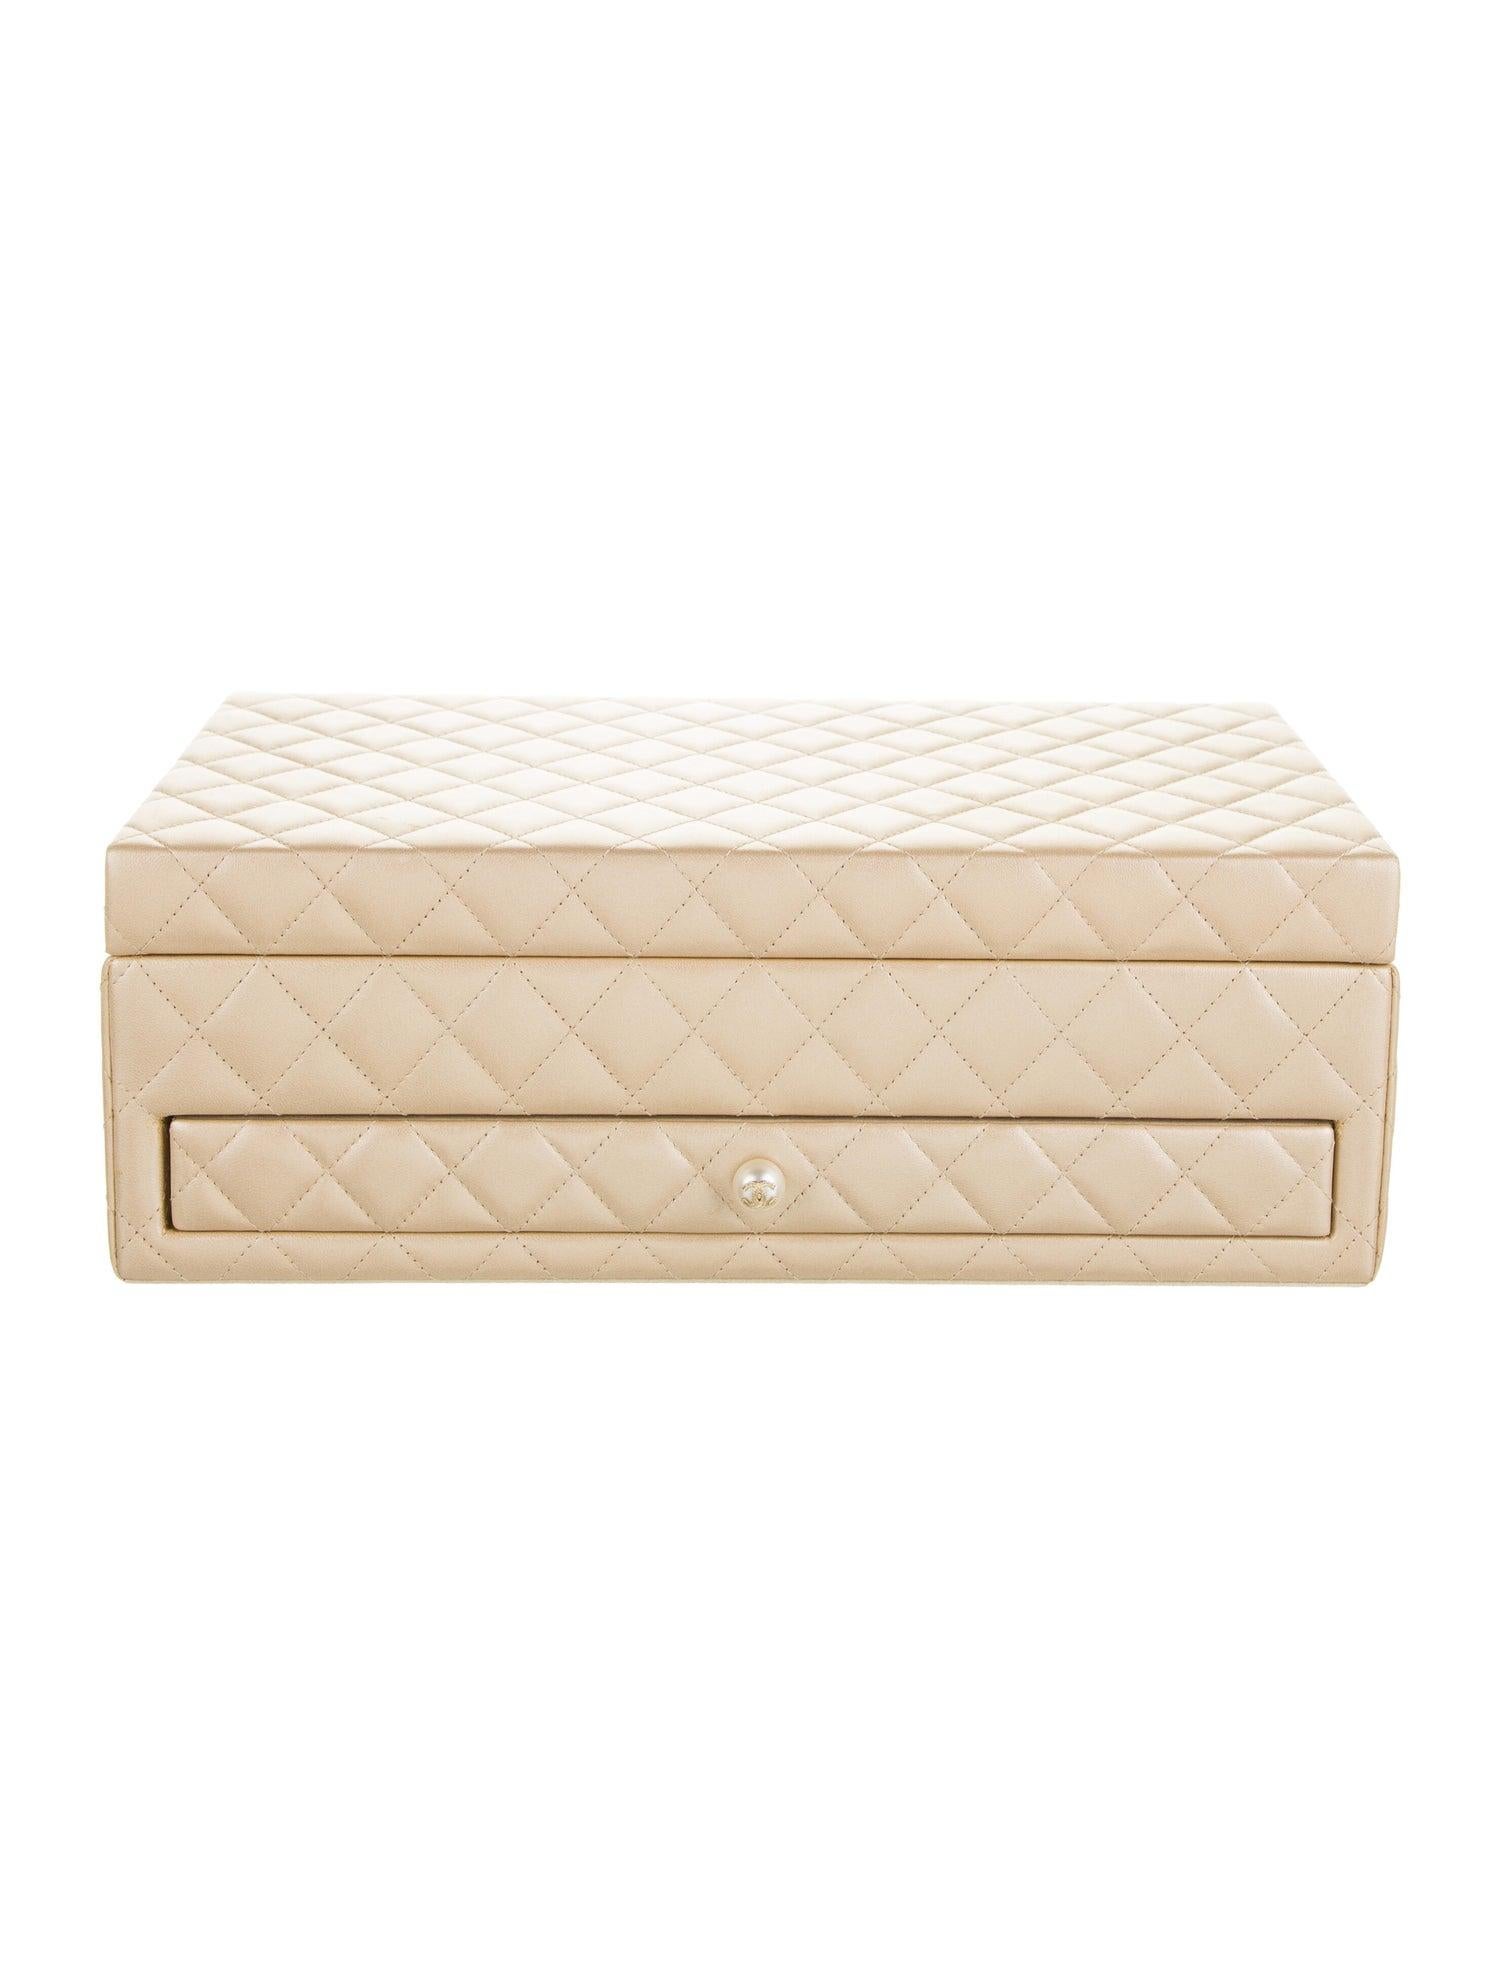 Chanel Limited Edition Pearl Lambskin Quilted Leather Rare Jewelry Box Vanity Case Home Decor

Gold hardware
Quilted Lambskin leather
CC studded pearl drawer knob
Features removable top tray and sliding drawer with 12 compartments
Measures 13.25